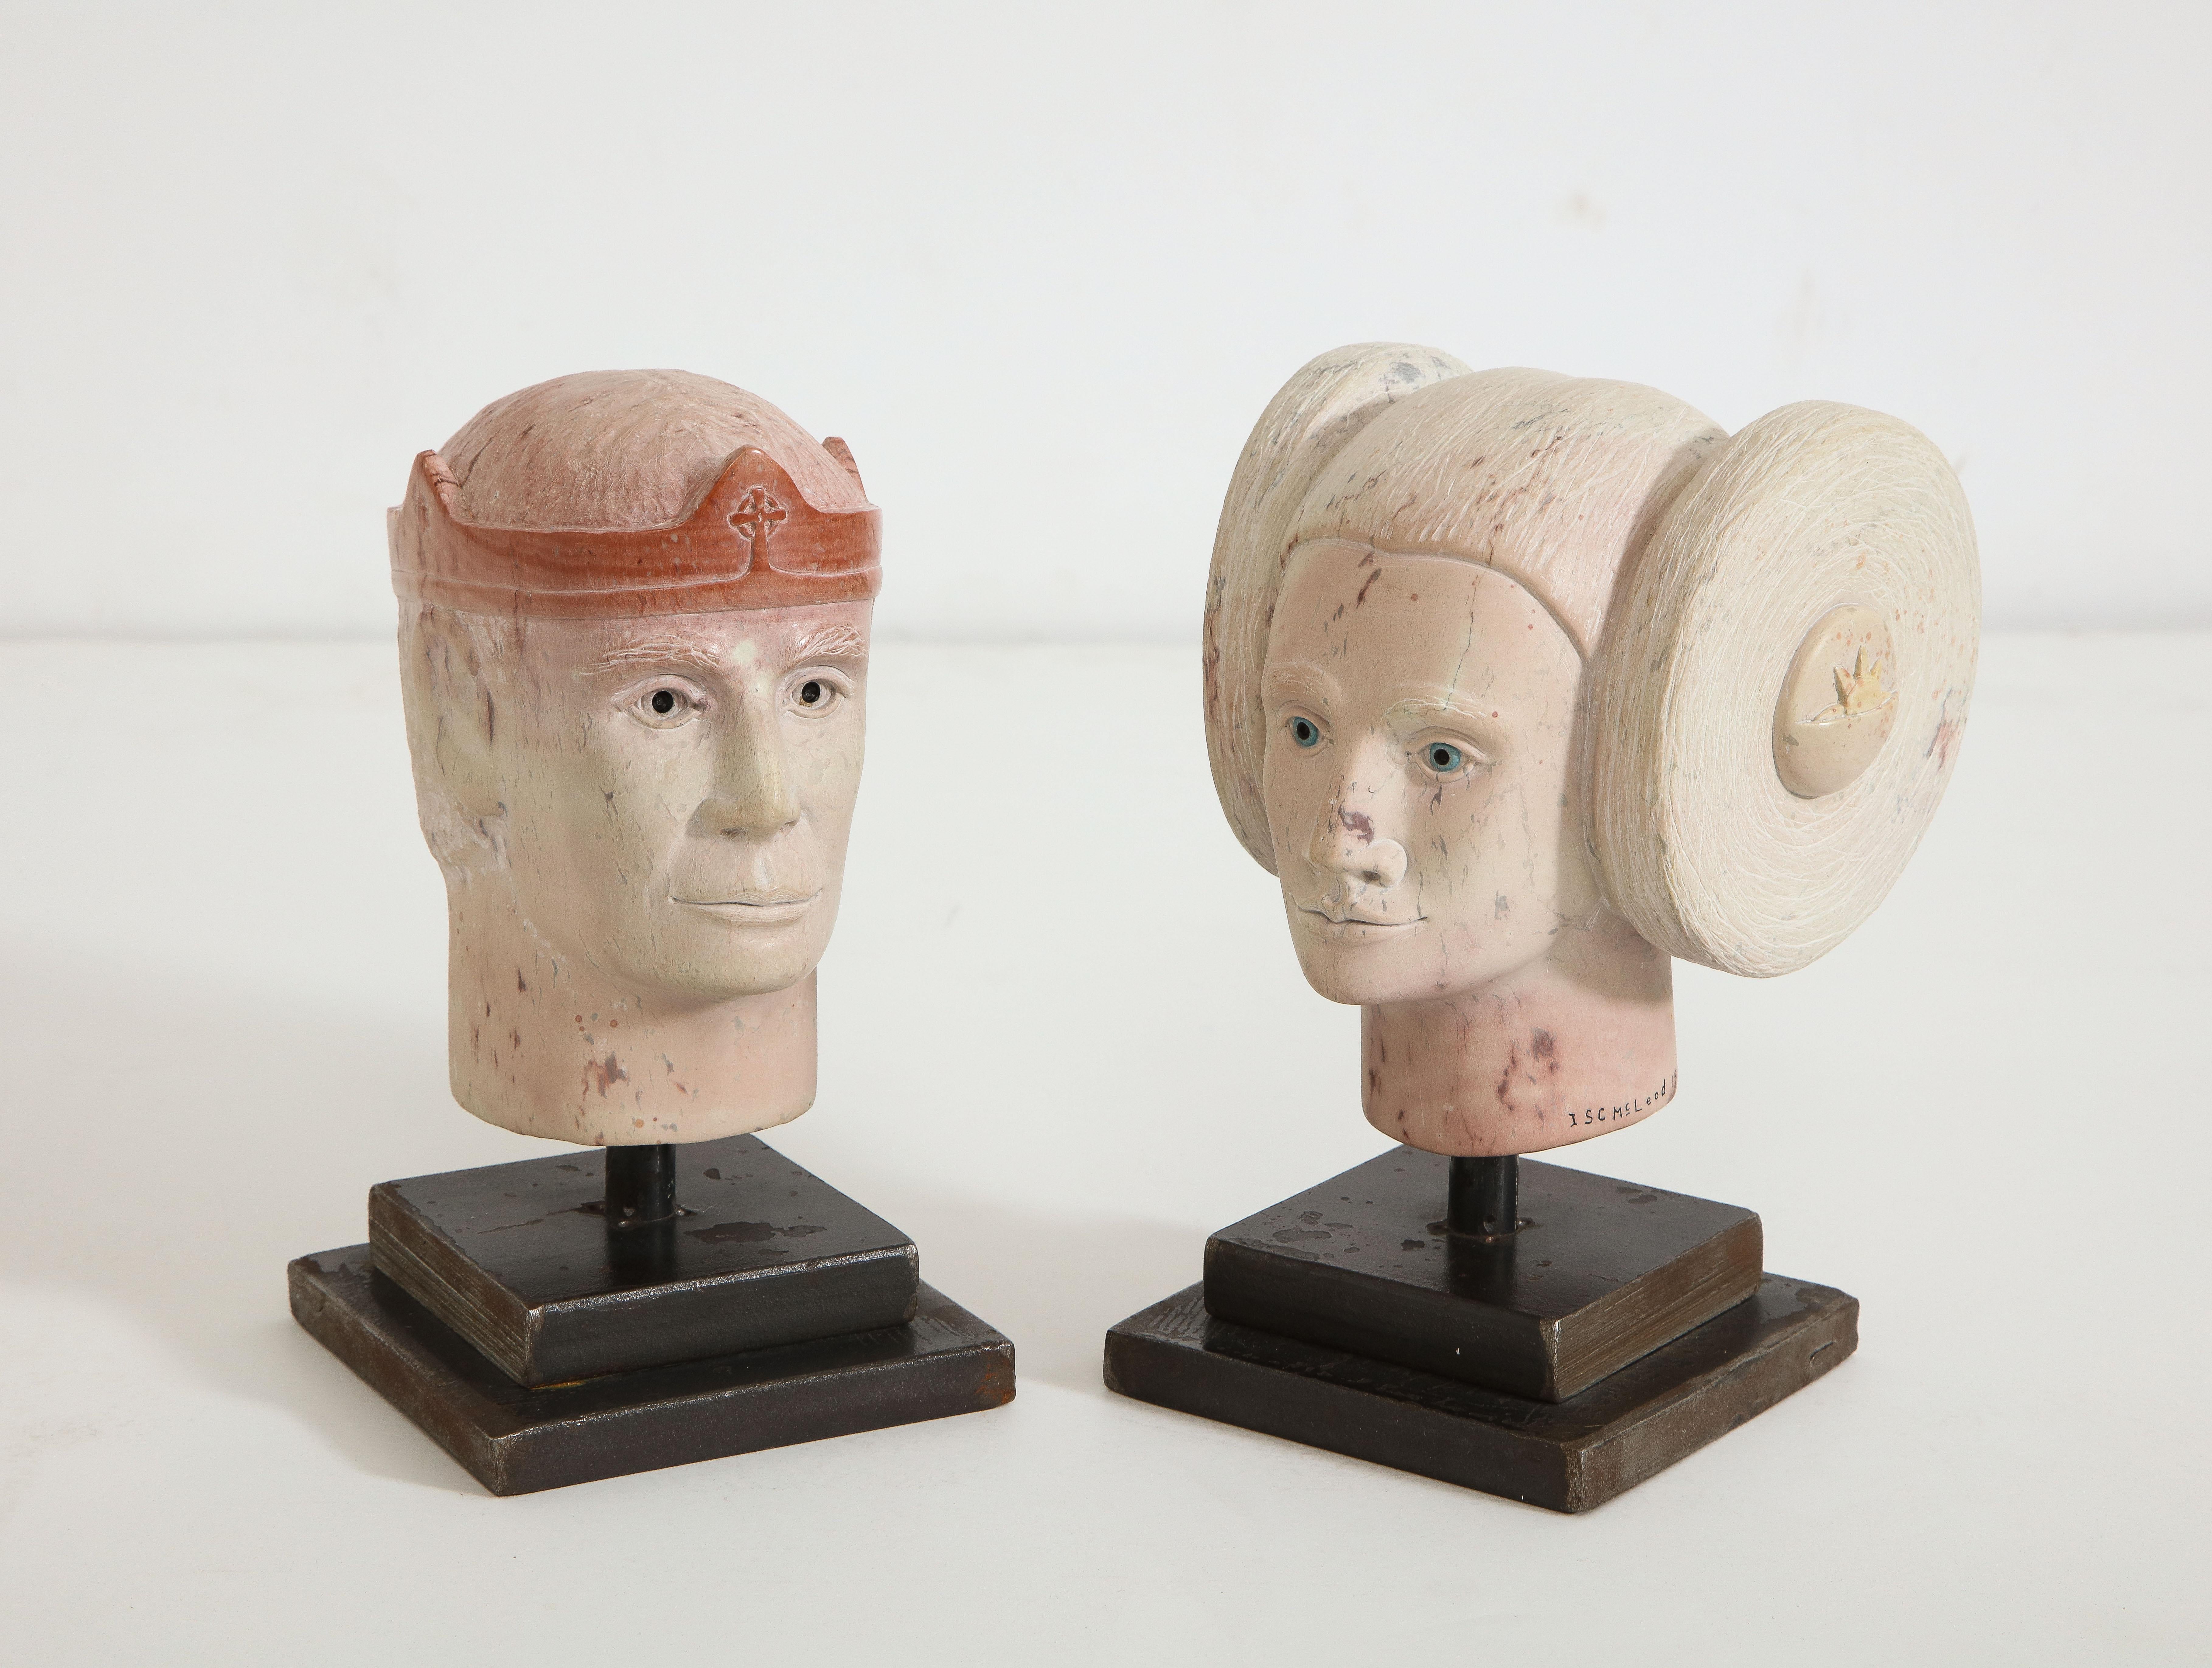 A very stylized pair of sculpted miniature granite heads depicting a mystical Prince and Princess, both signed ISC McLeod (for Scott McLeod) and dated 1996, mounted on stepped steel bases. 

Scott McLeod (b. 1952) is a self-taught Canadian